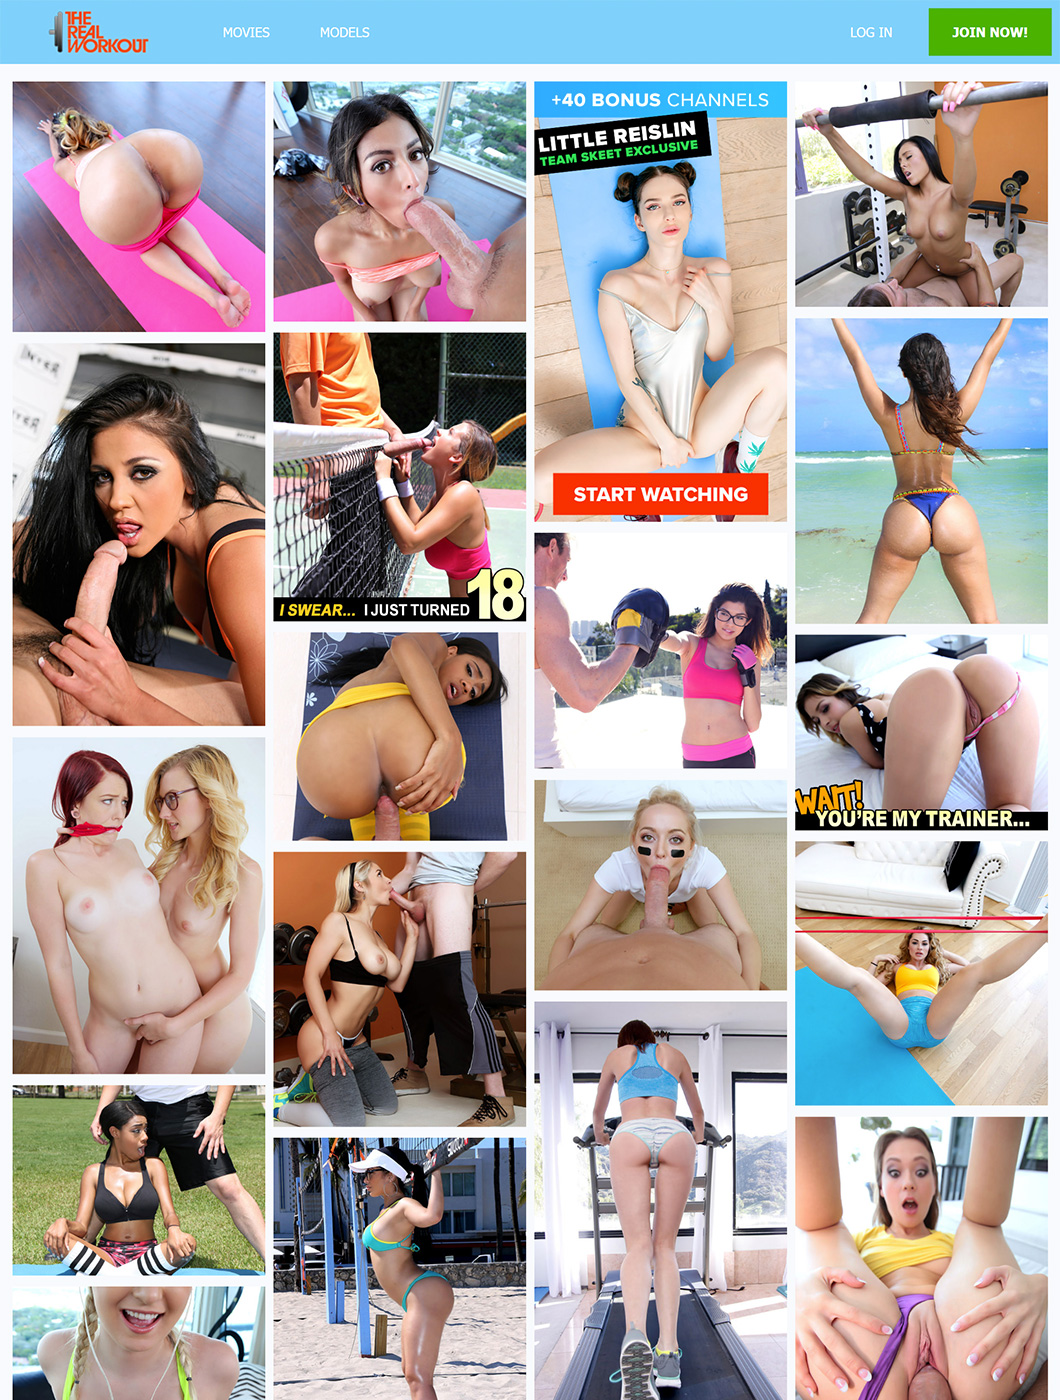 The Real Workout - Fitness Porn Sites â€” Therealworkout.com